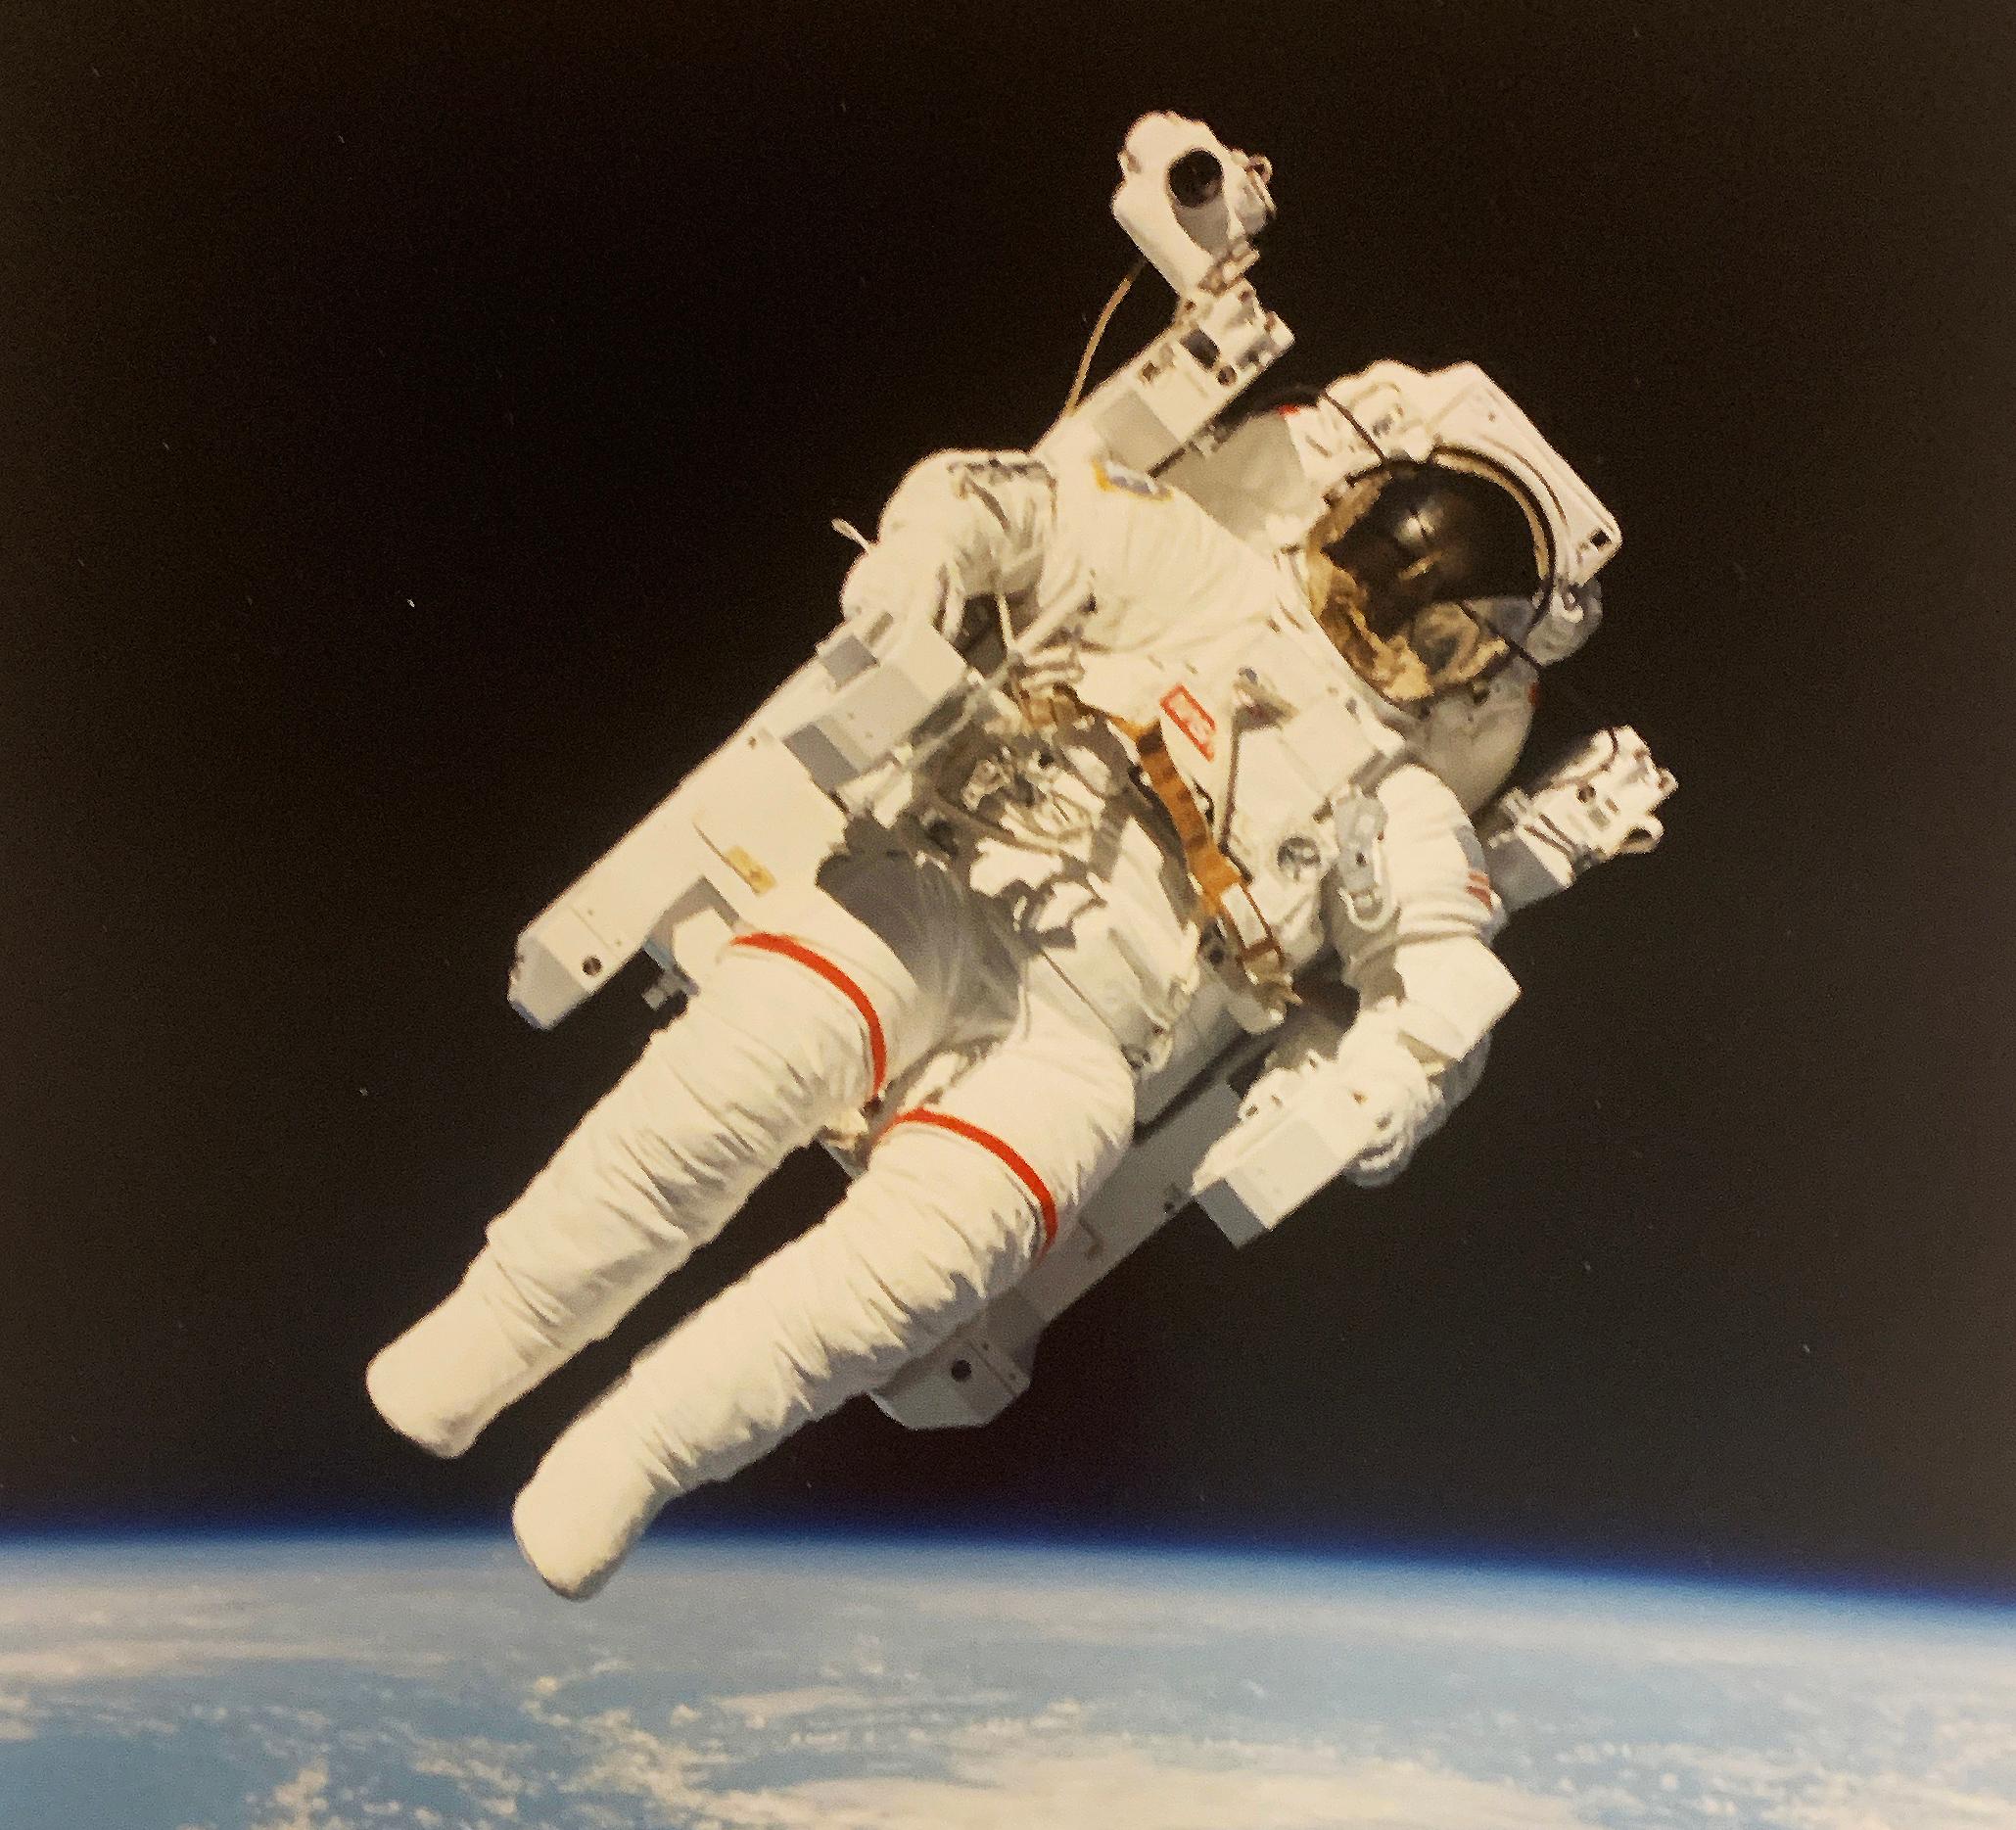 Historic portrait photography of the first man to fly untethered in space. Above the earth in 1984, NASA Astronaut Bruce McCandless and his Manned Maneuvering Unit (MMU). 

Crewmembers aboard the space shuttle Challenger nearby used a 70mm camera to